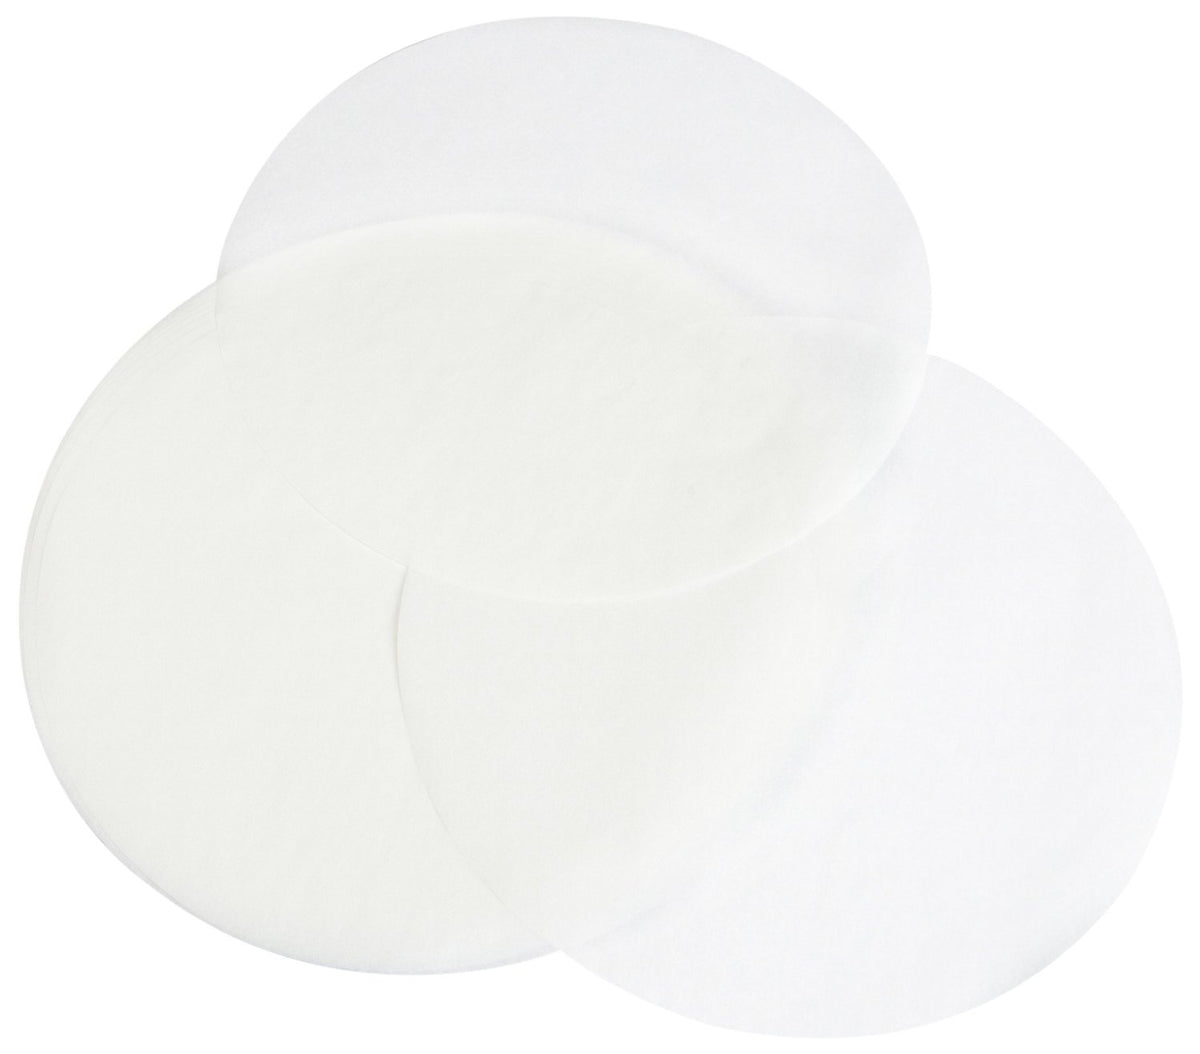 Buy regency parchment paper round - Online store for kitchenware, bakeware accessories in USA, on sale, low price, discount deals, coupon code